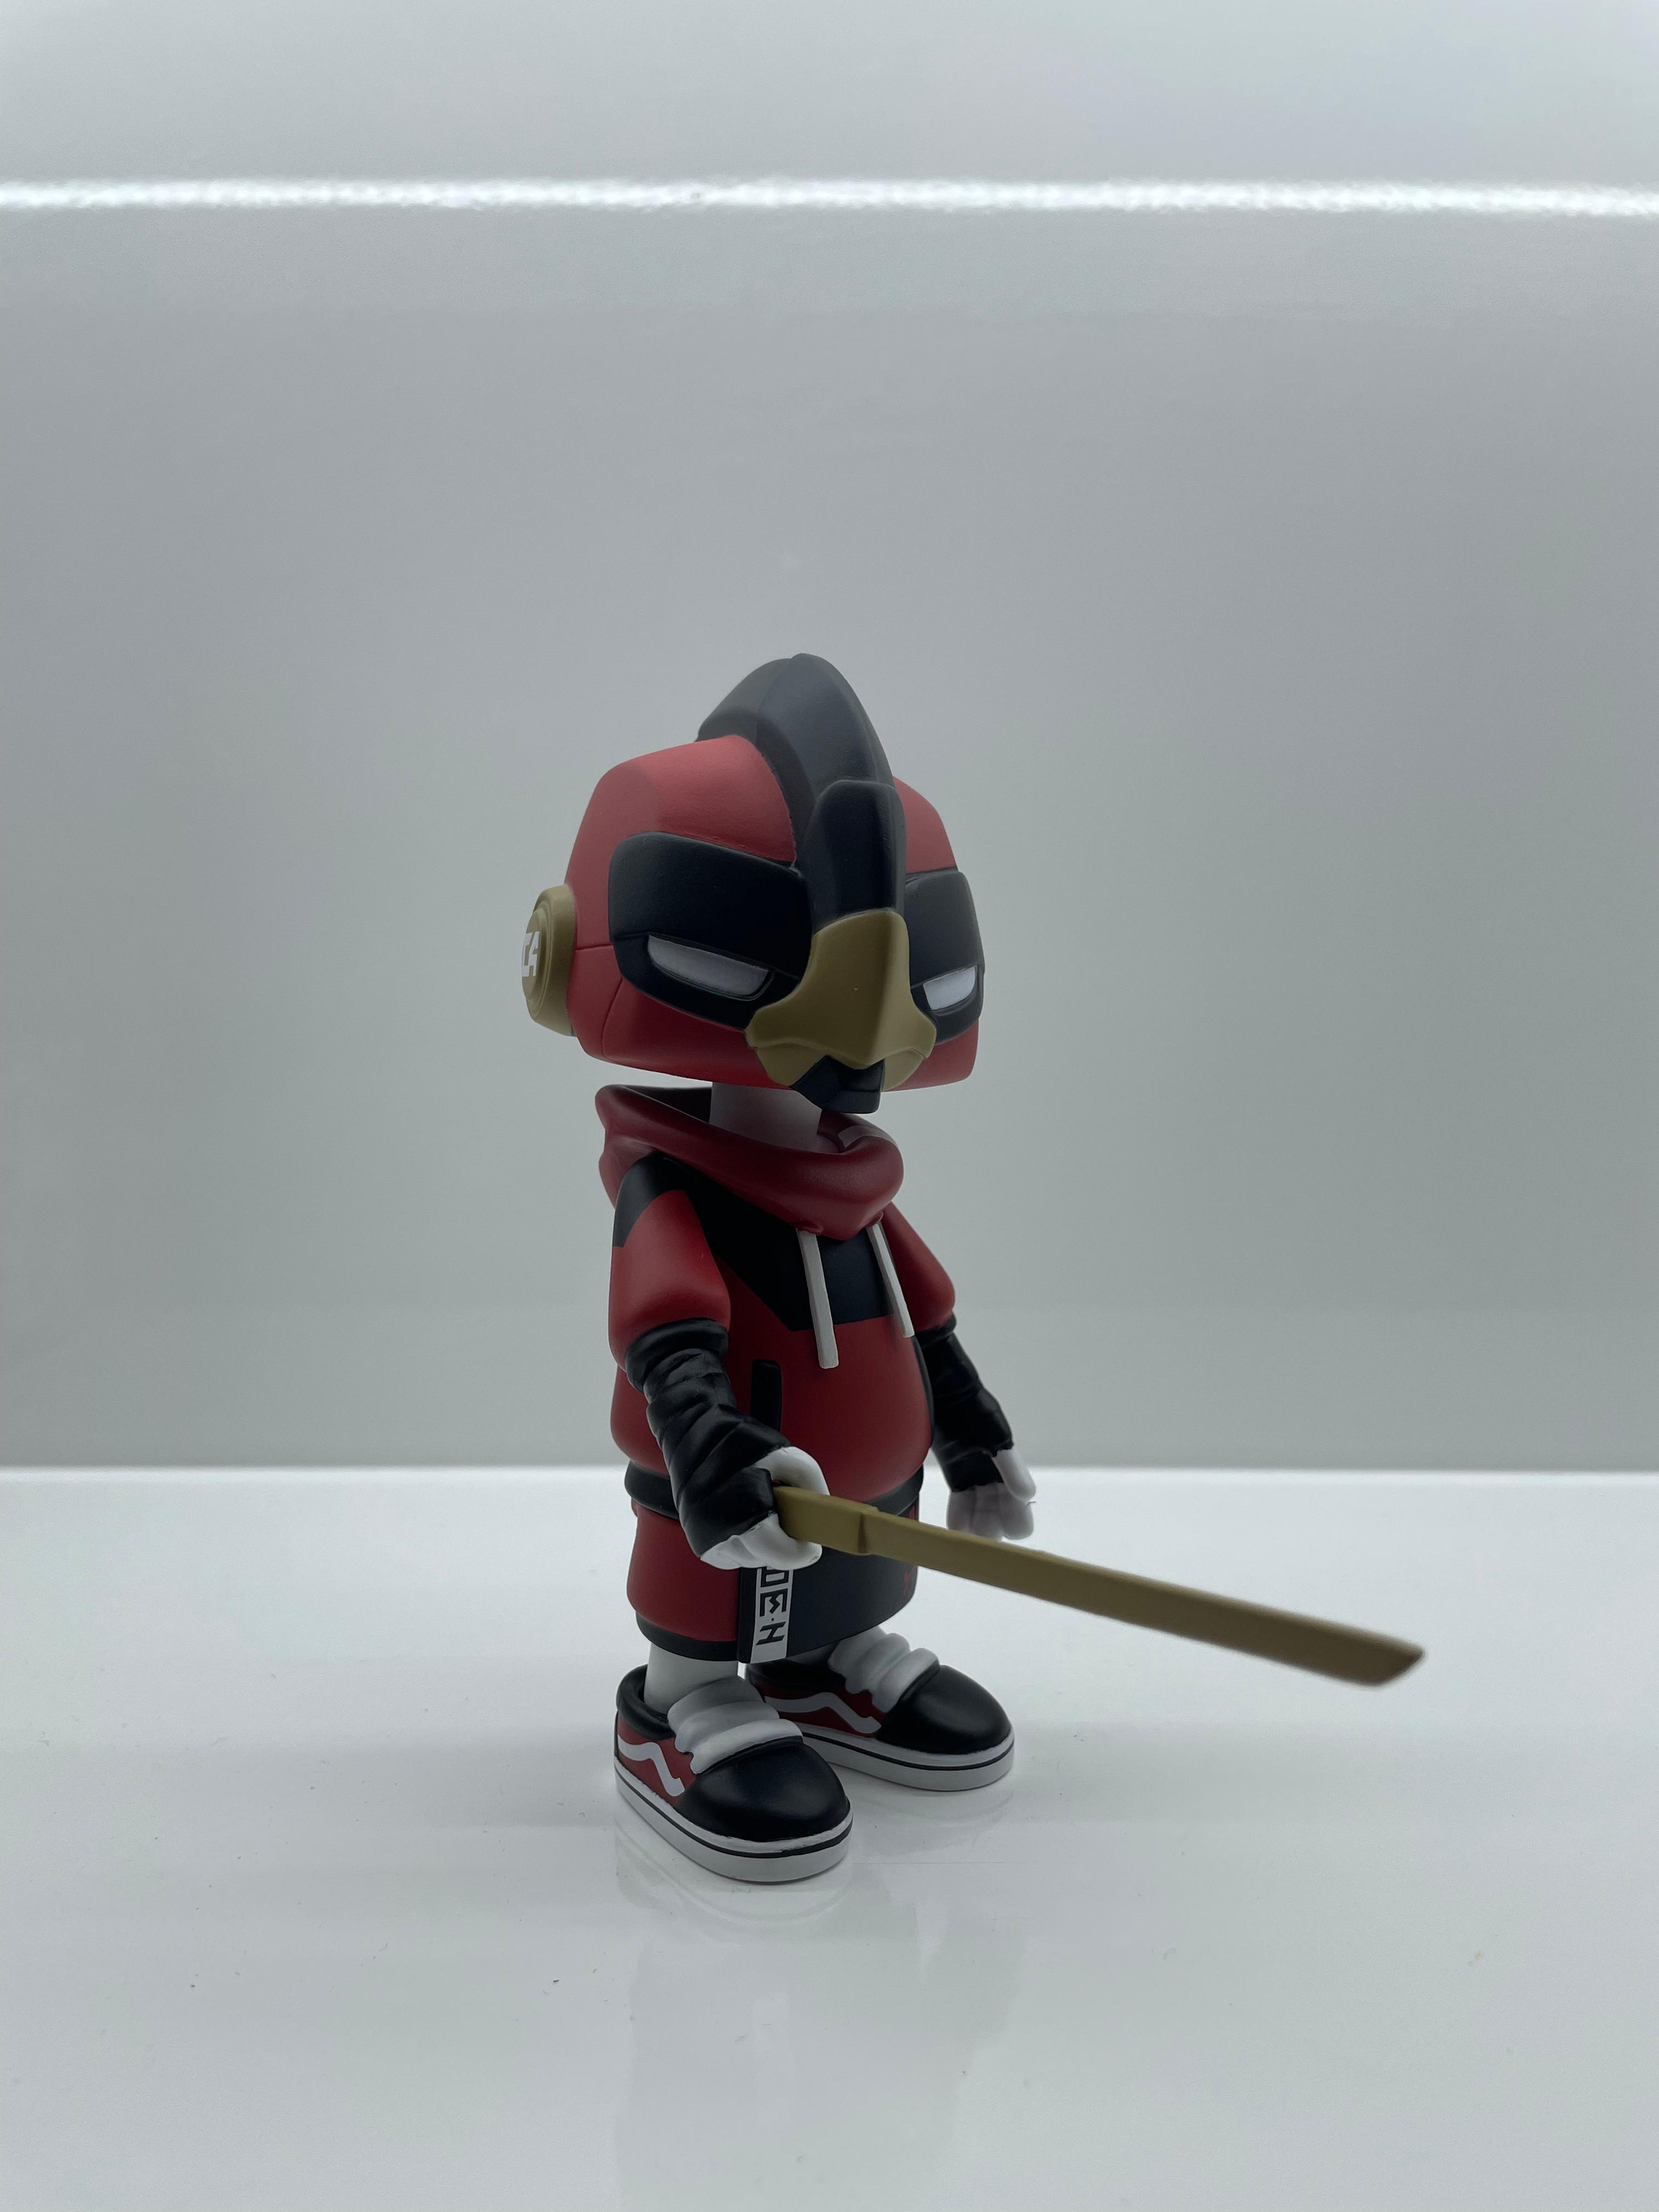 Alternate View 11 of C4: Red Talon by ChknHead Creon x Martian Toys